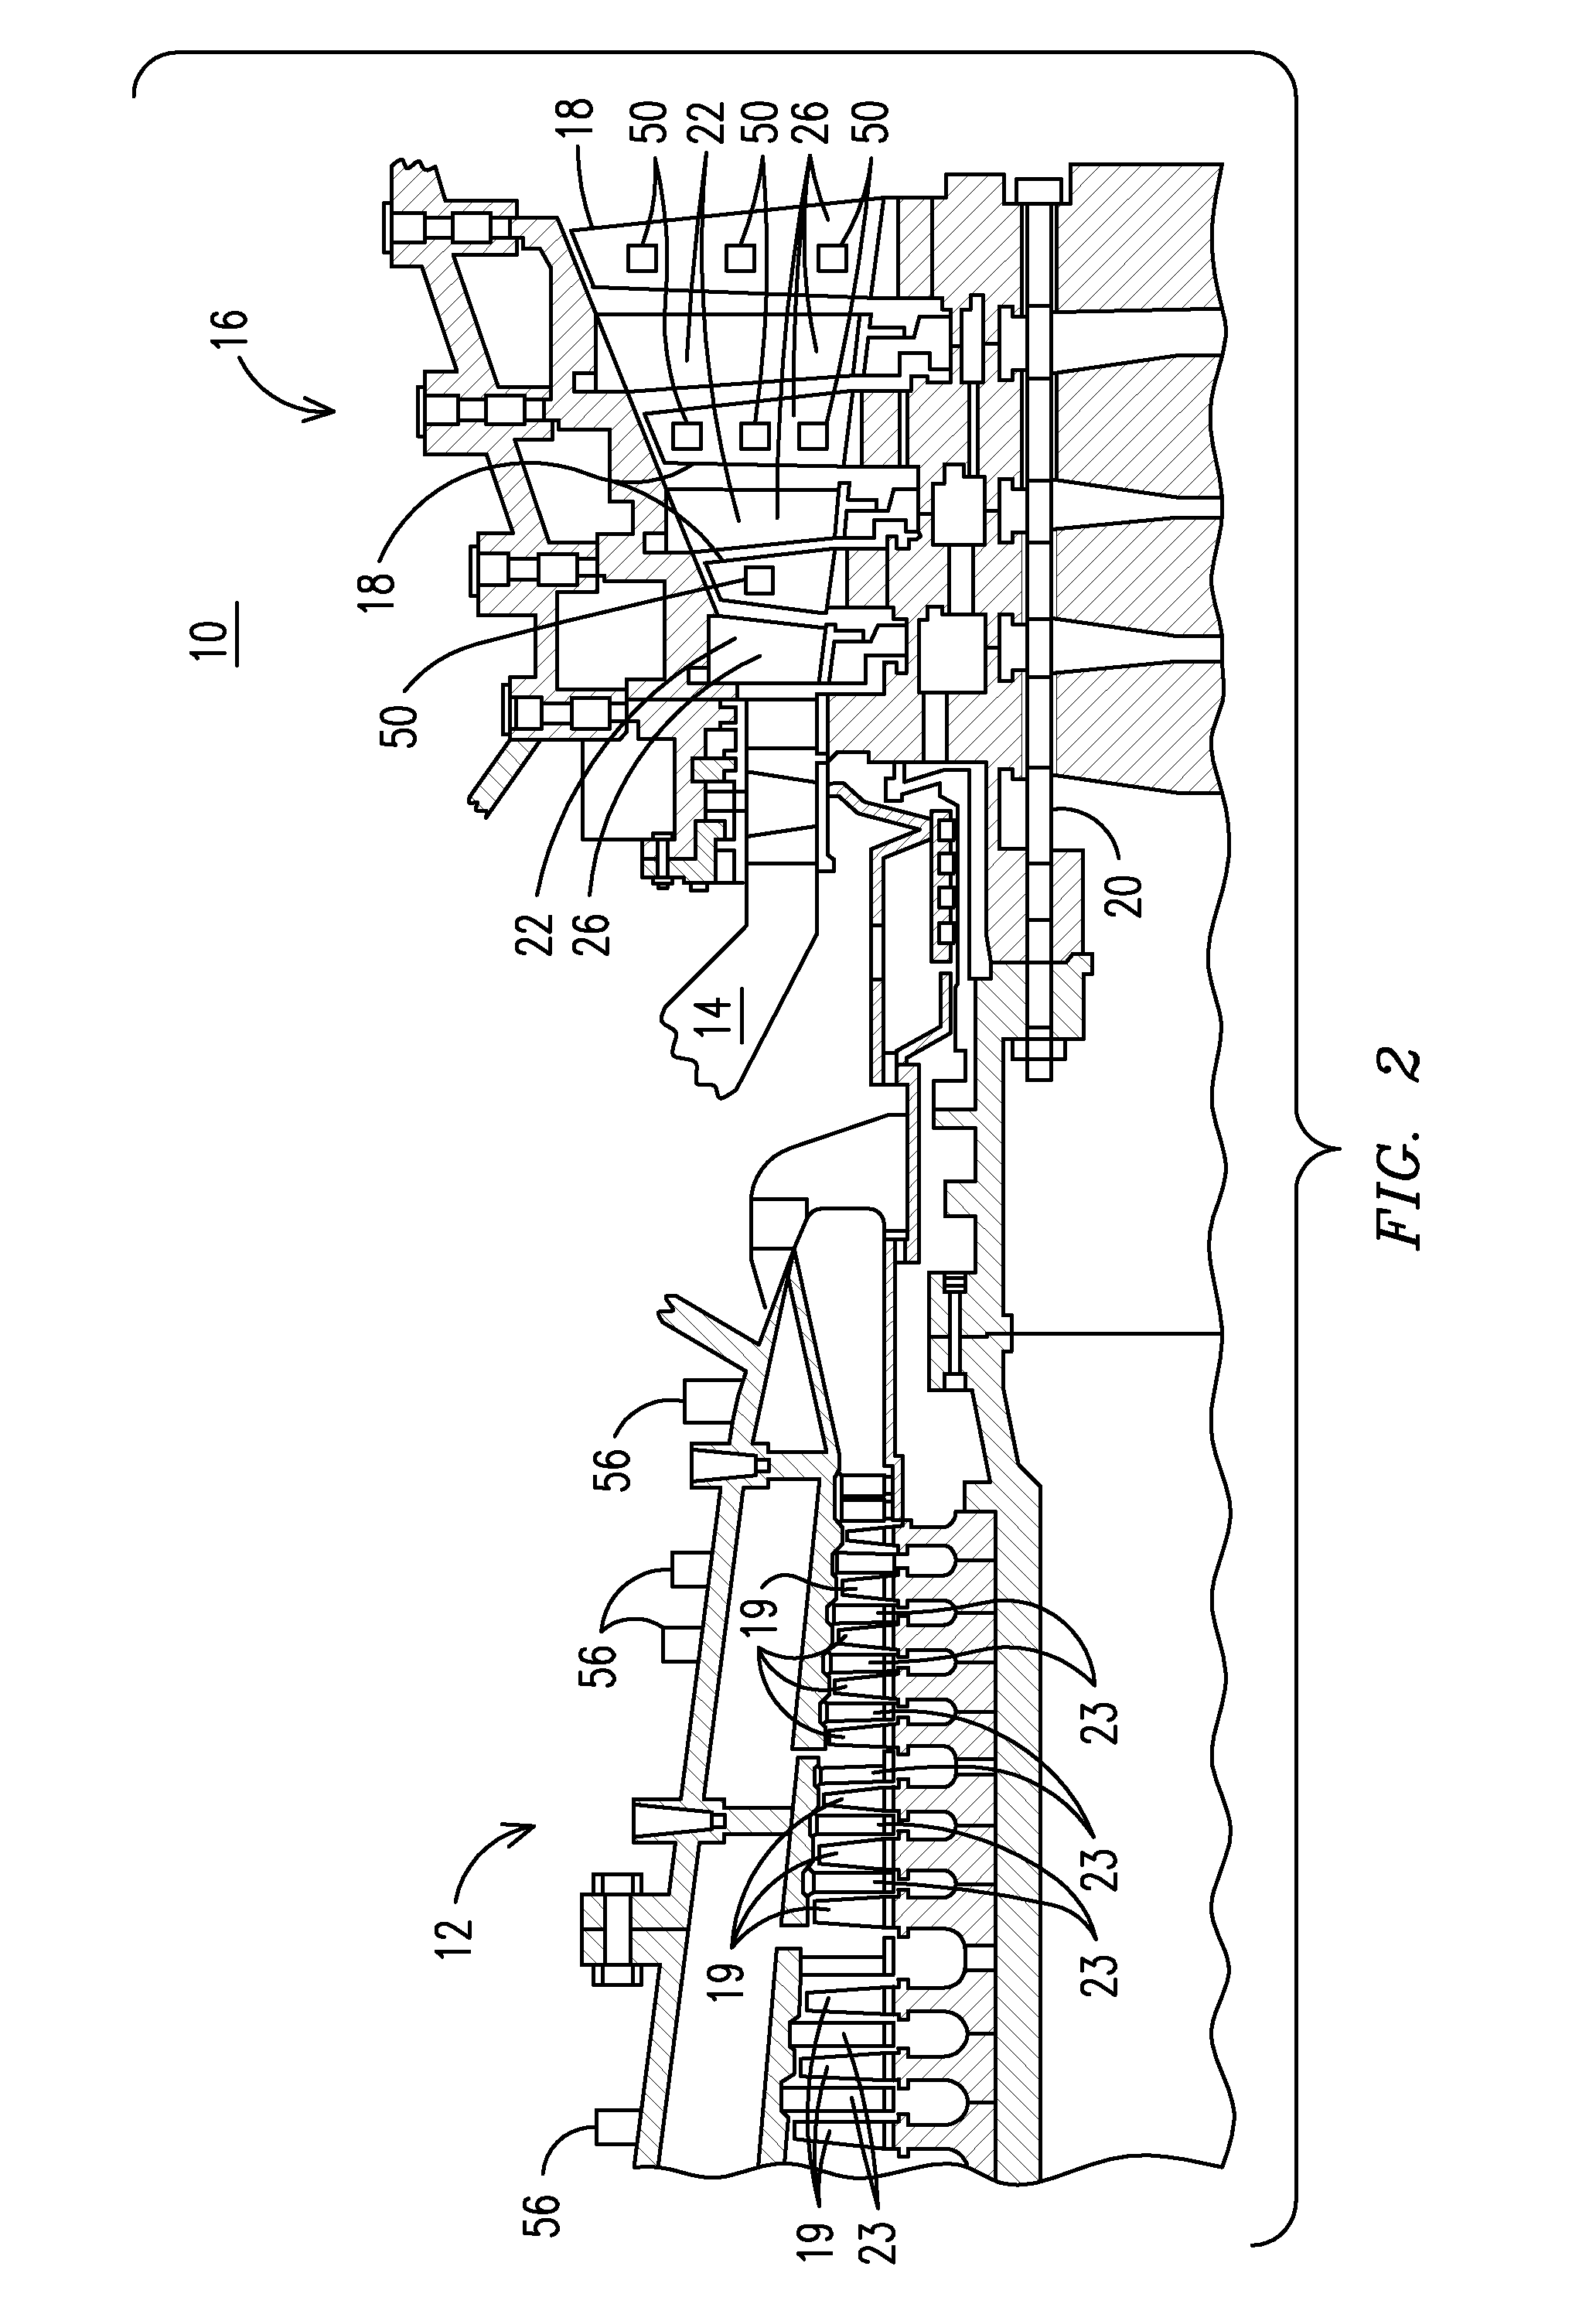 Wireless telemetry system for a turbine engine